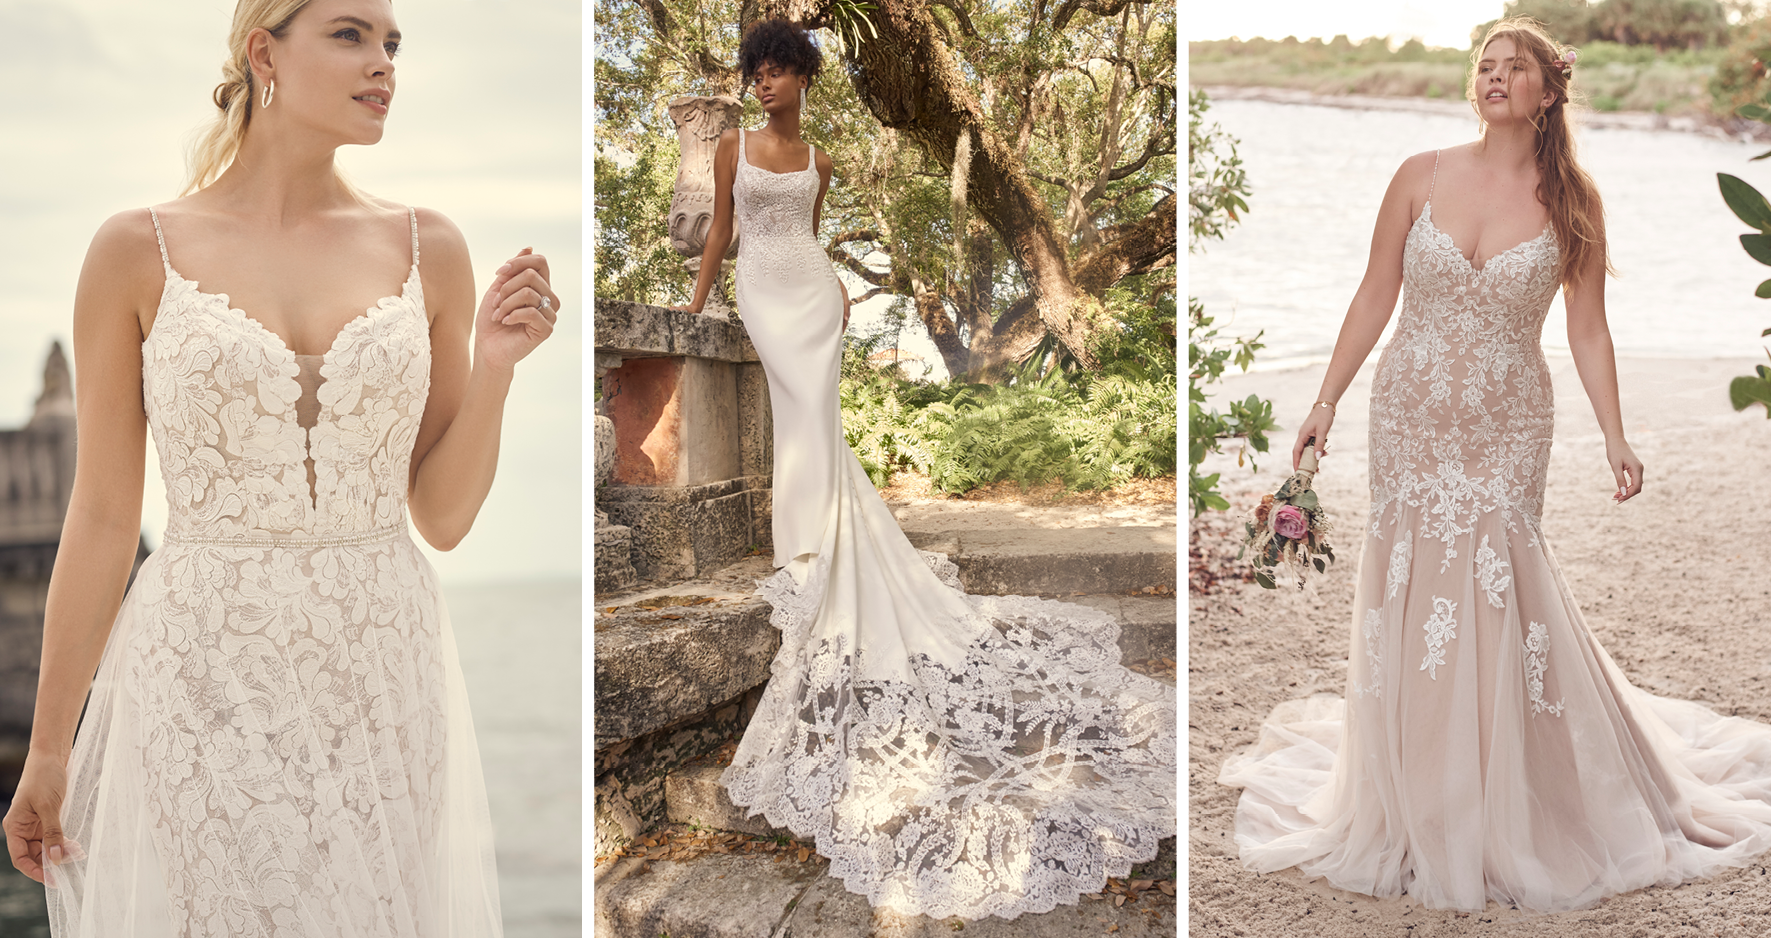 Collage of Brides Wearing Fit-and-Flare Wedding Dresses by Maggie Sottero for Brides with Athletic Body Types